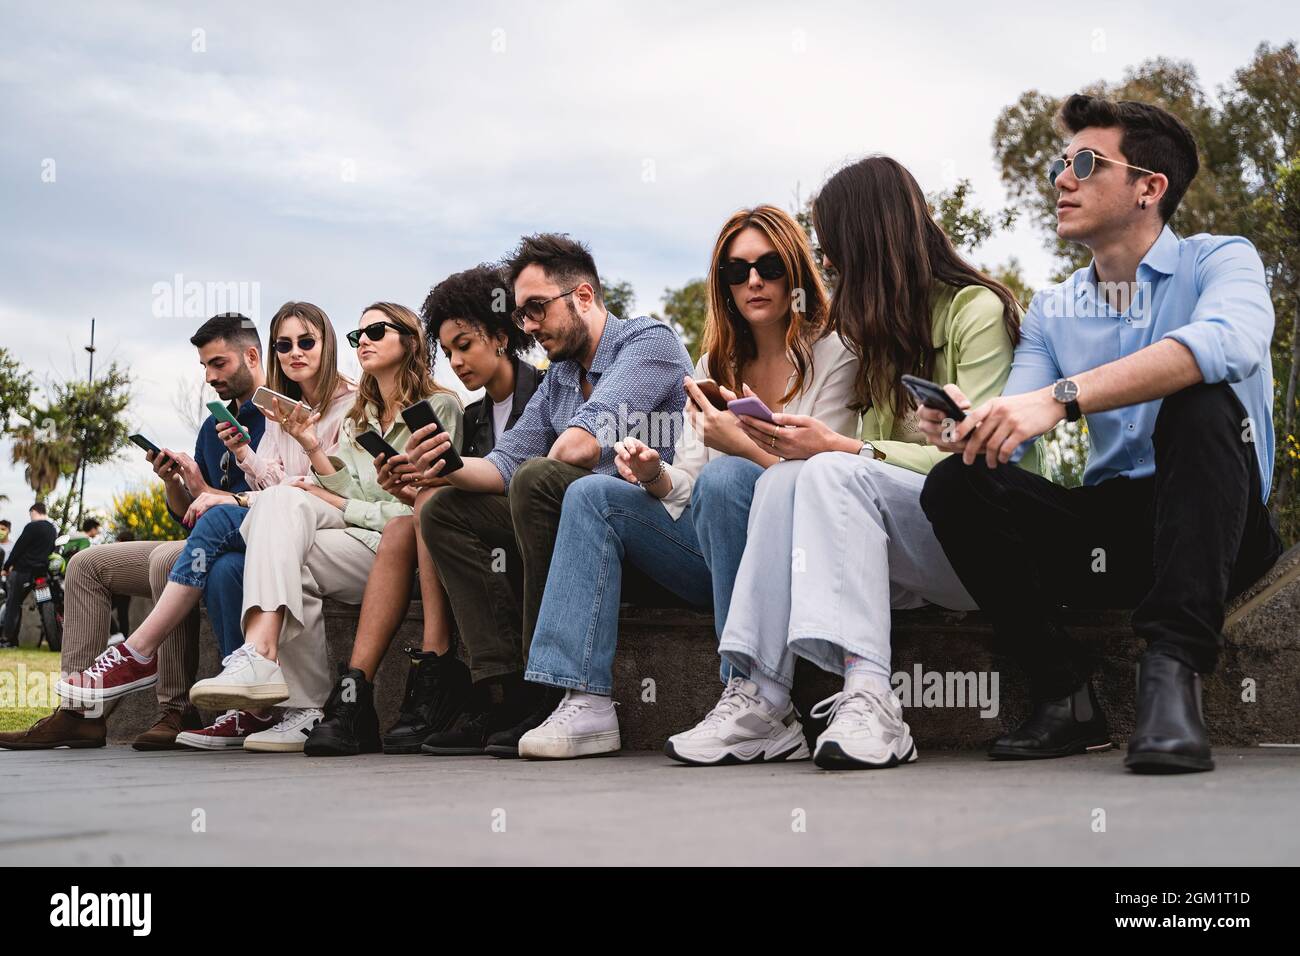 Generation z young people sitting on a bench and using smartphone. Concept of young people addicted to technology and social network. Stock Photo